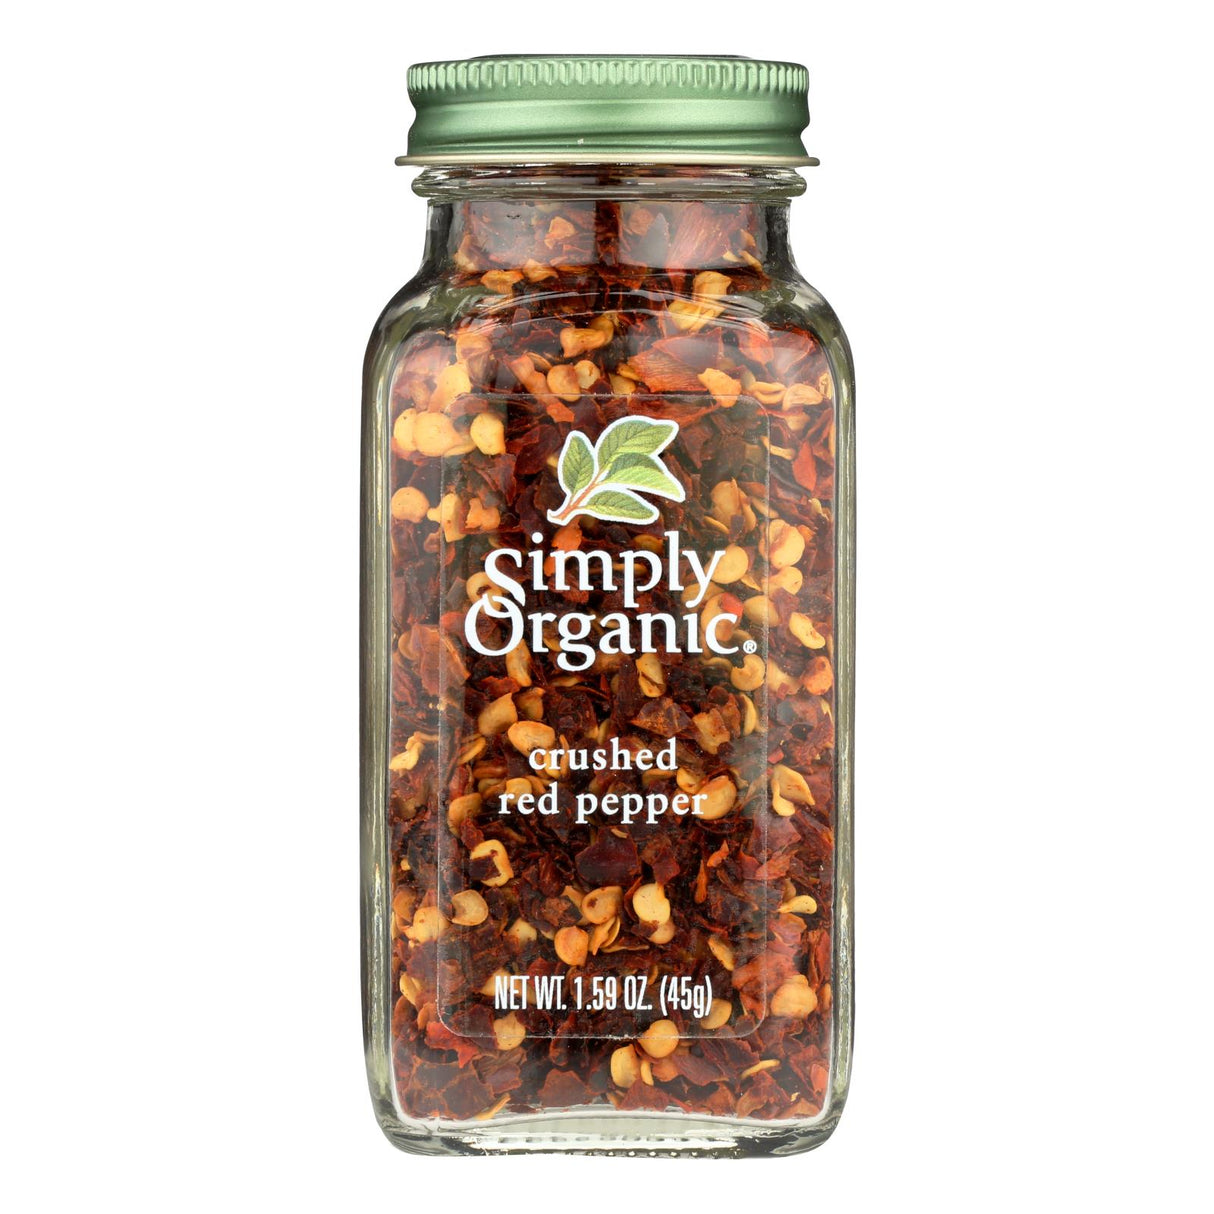 Simply Organic Crushed Red Pepper: Authentic Italian Flavor, 1.59 Oz. - Cozy Farm 